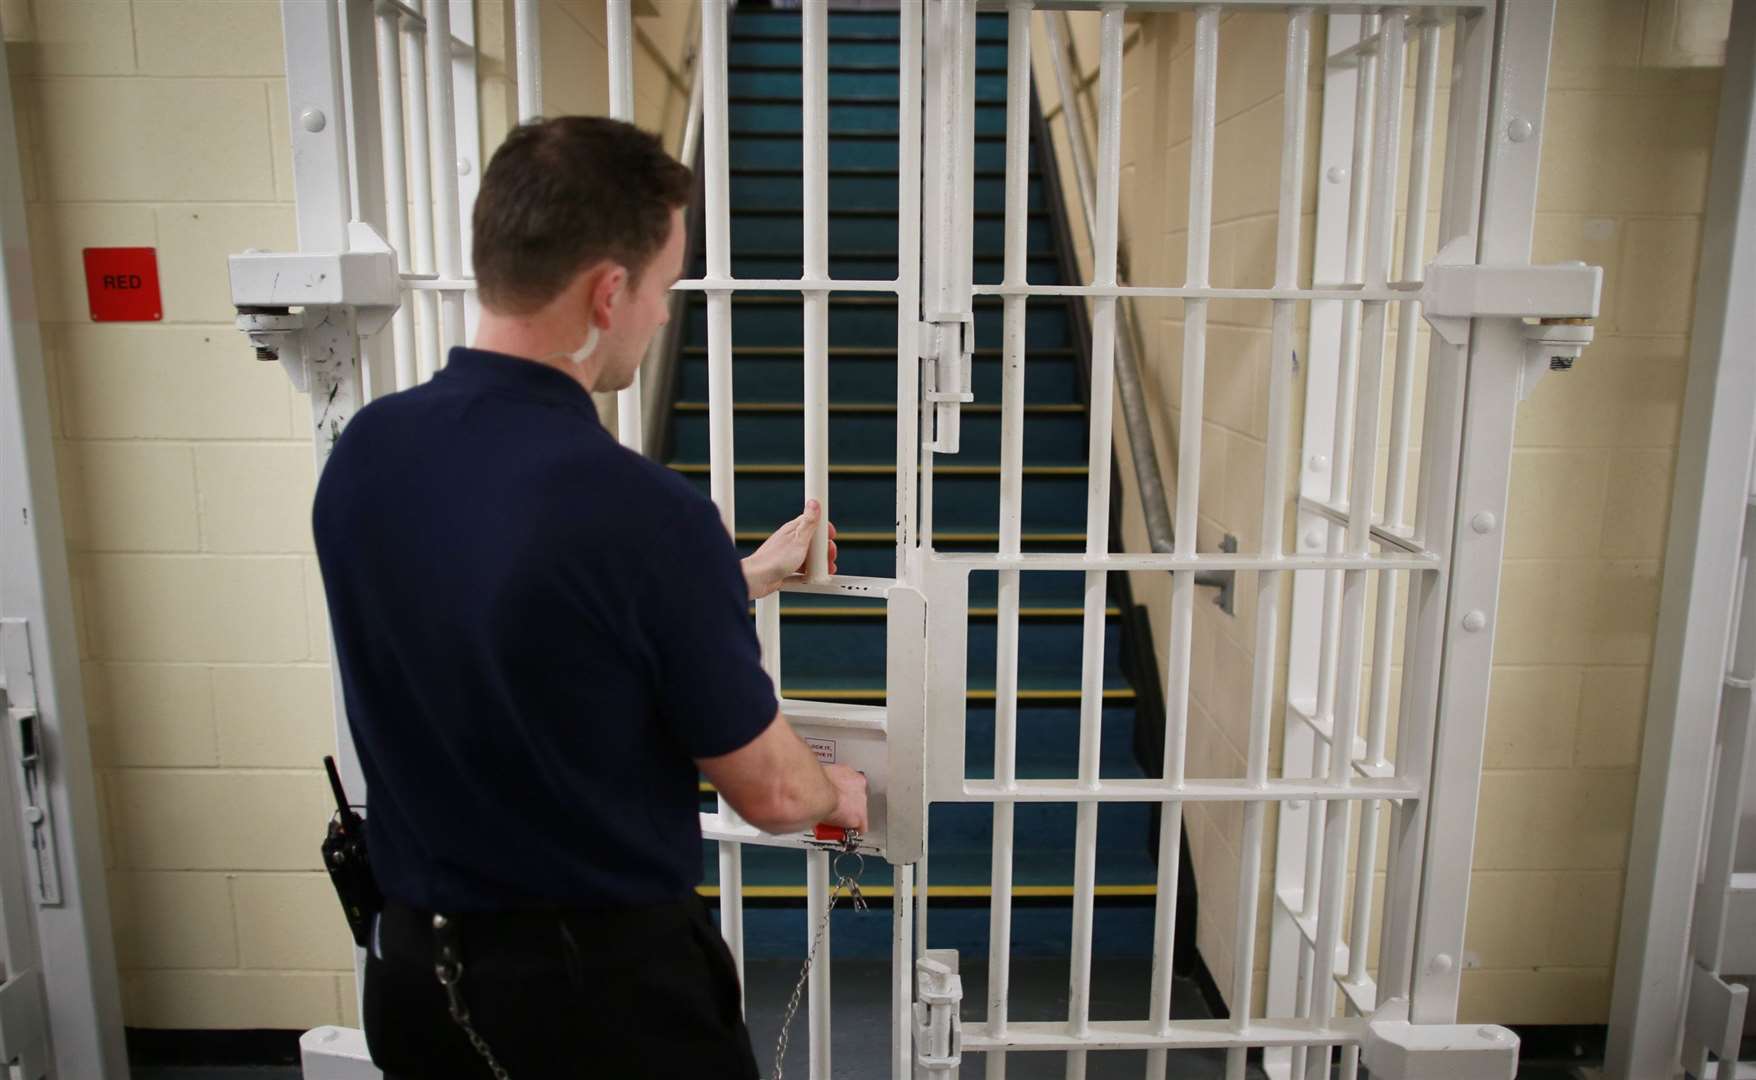 A review has been launched into how prison officers blow the whistle on working practices